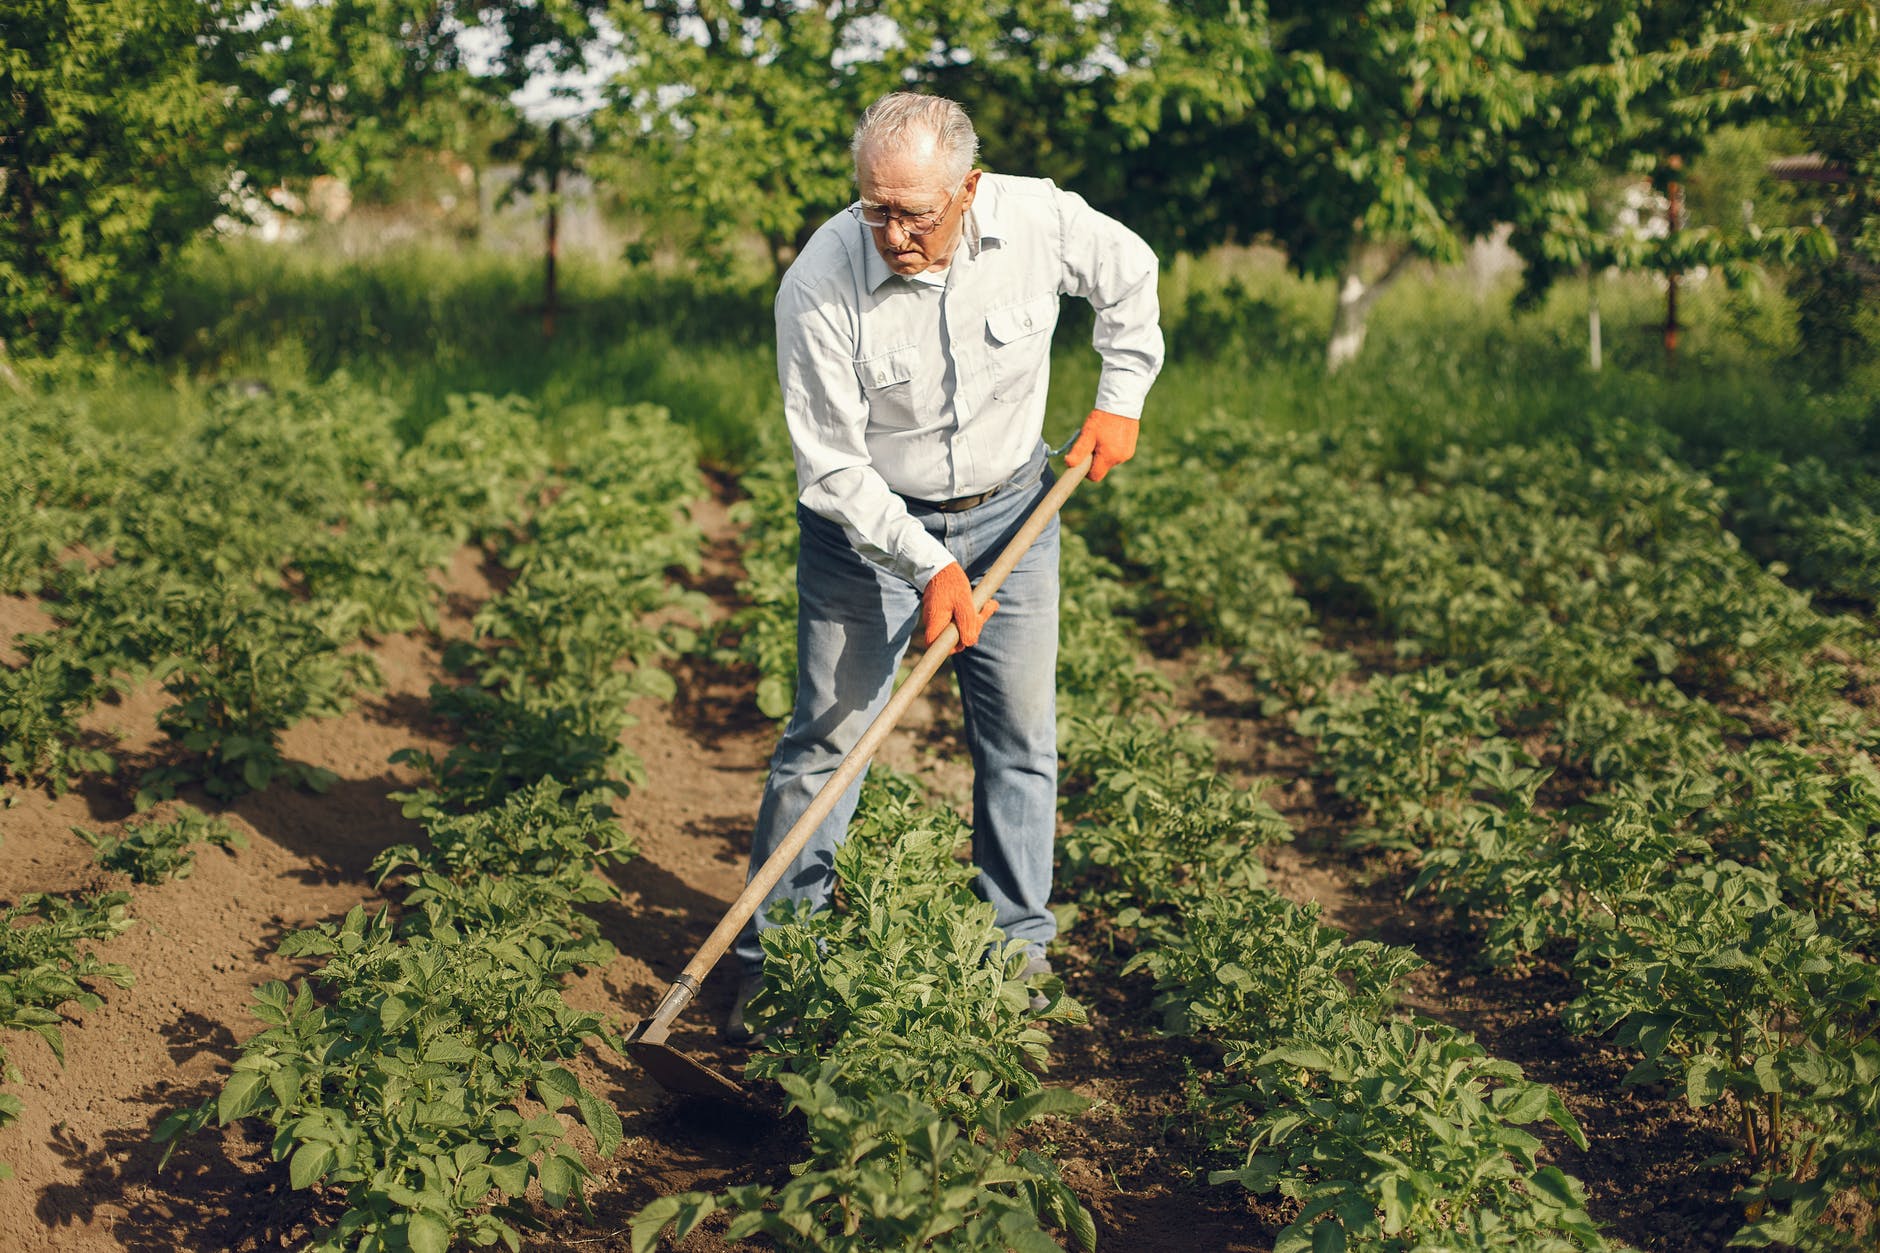 Man in jeans using a rake to garden | Source: Pexels